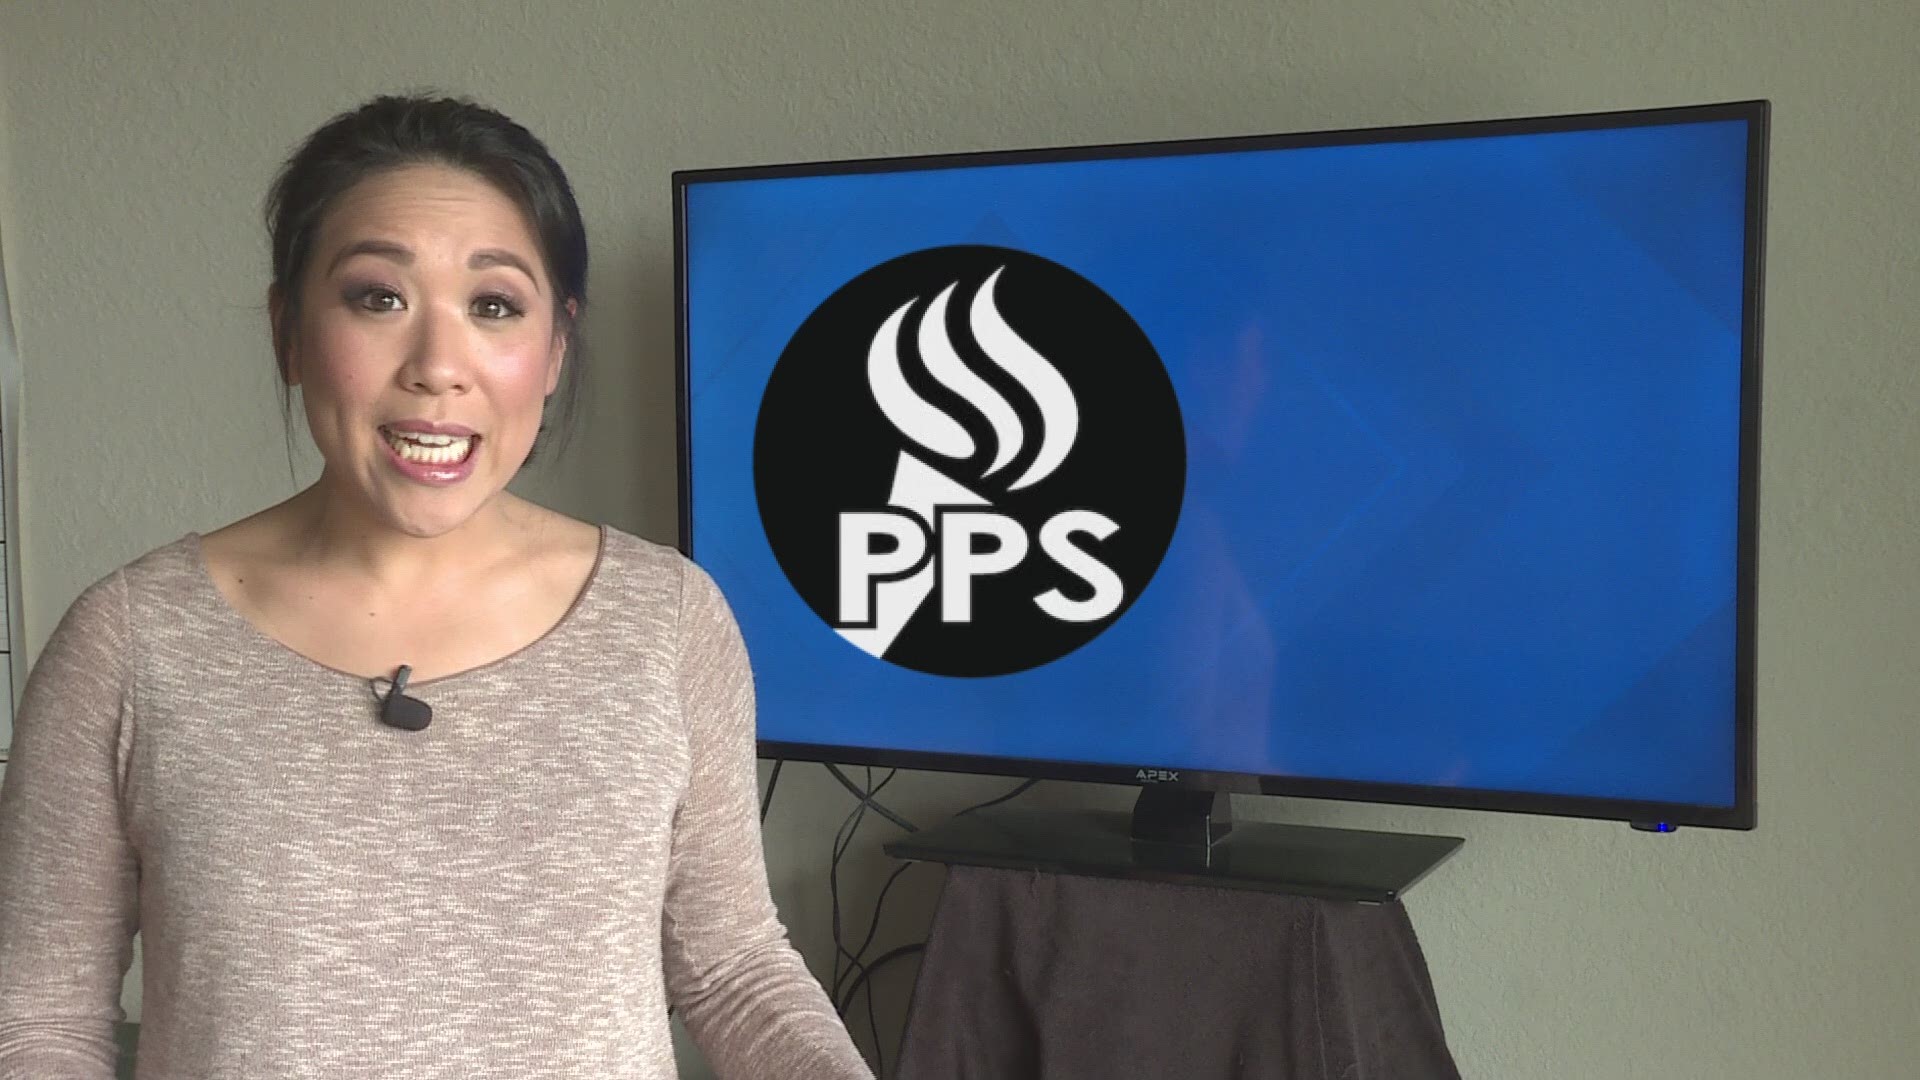 The district posted a video message from PPS Superintendent Guadalupe Guerrero talking about what the district has been doing and what families can expect.